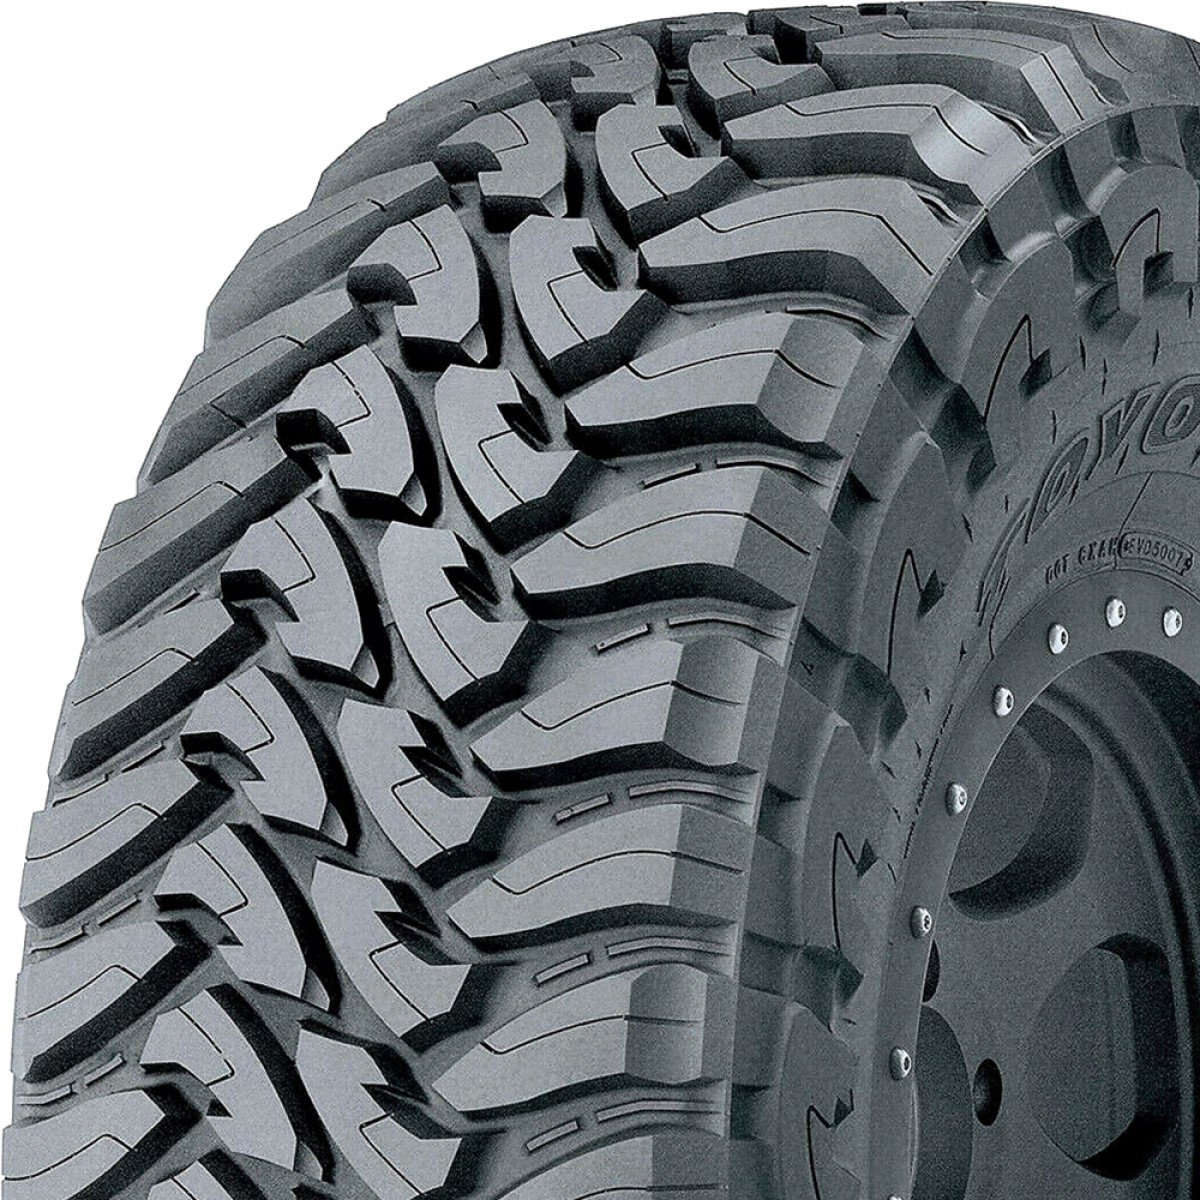 Toyo open country m. Toyo open Country m/t 225/75 r16. Шины Toyo open Country m/t. 265/75 R16 МТ Toyo. Автошина 225/75r16 115/112p open Country m/t Toyo TBL.